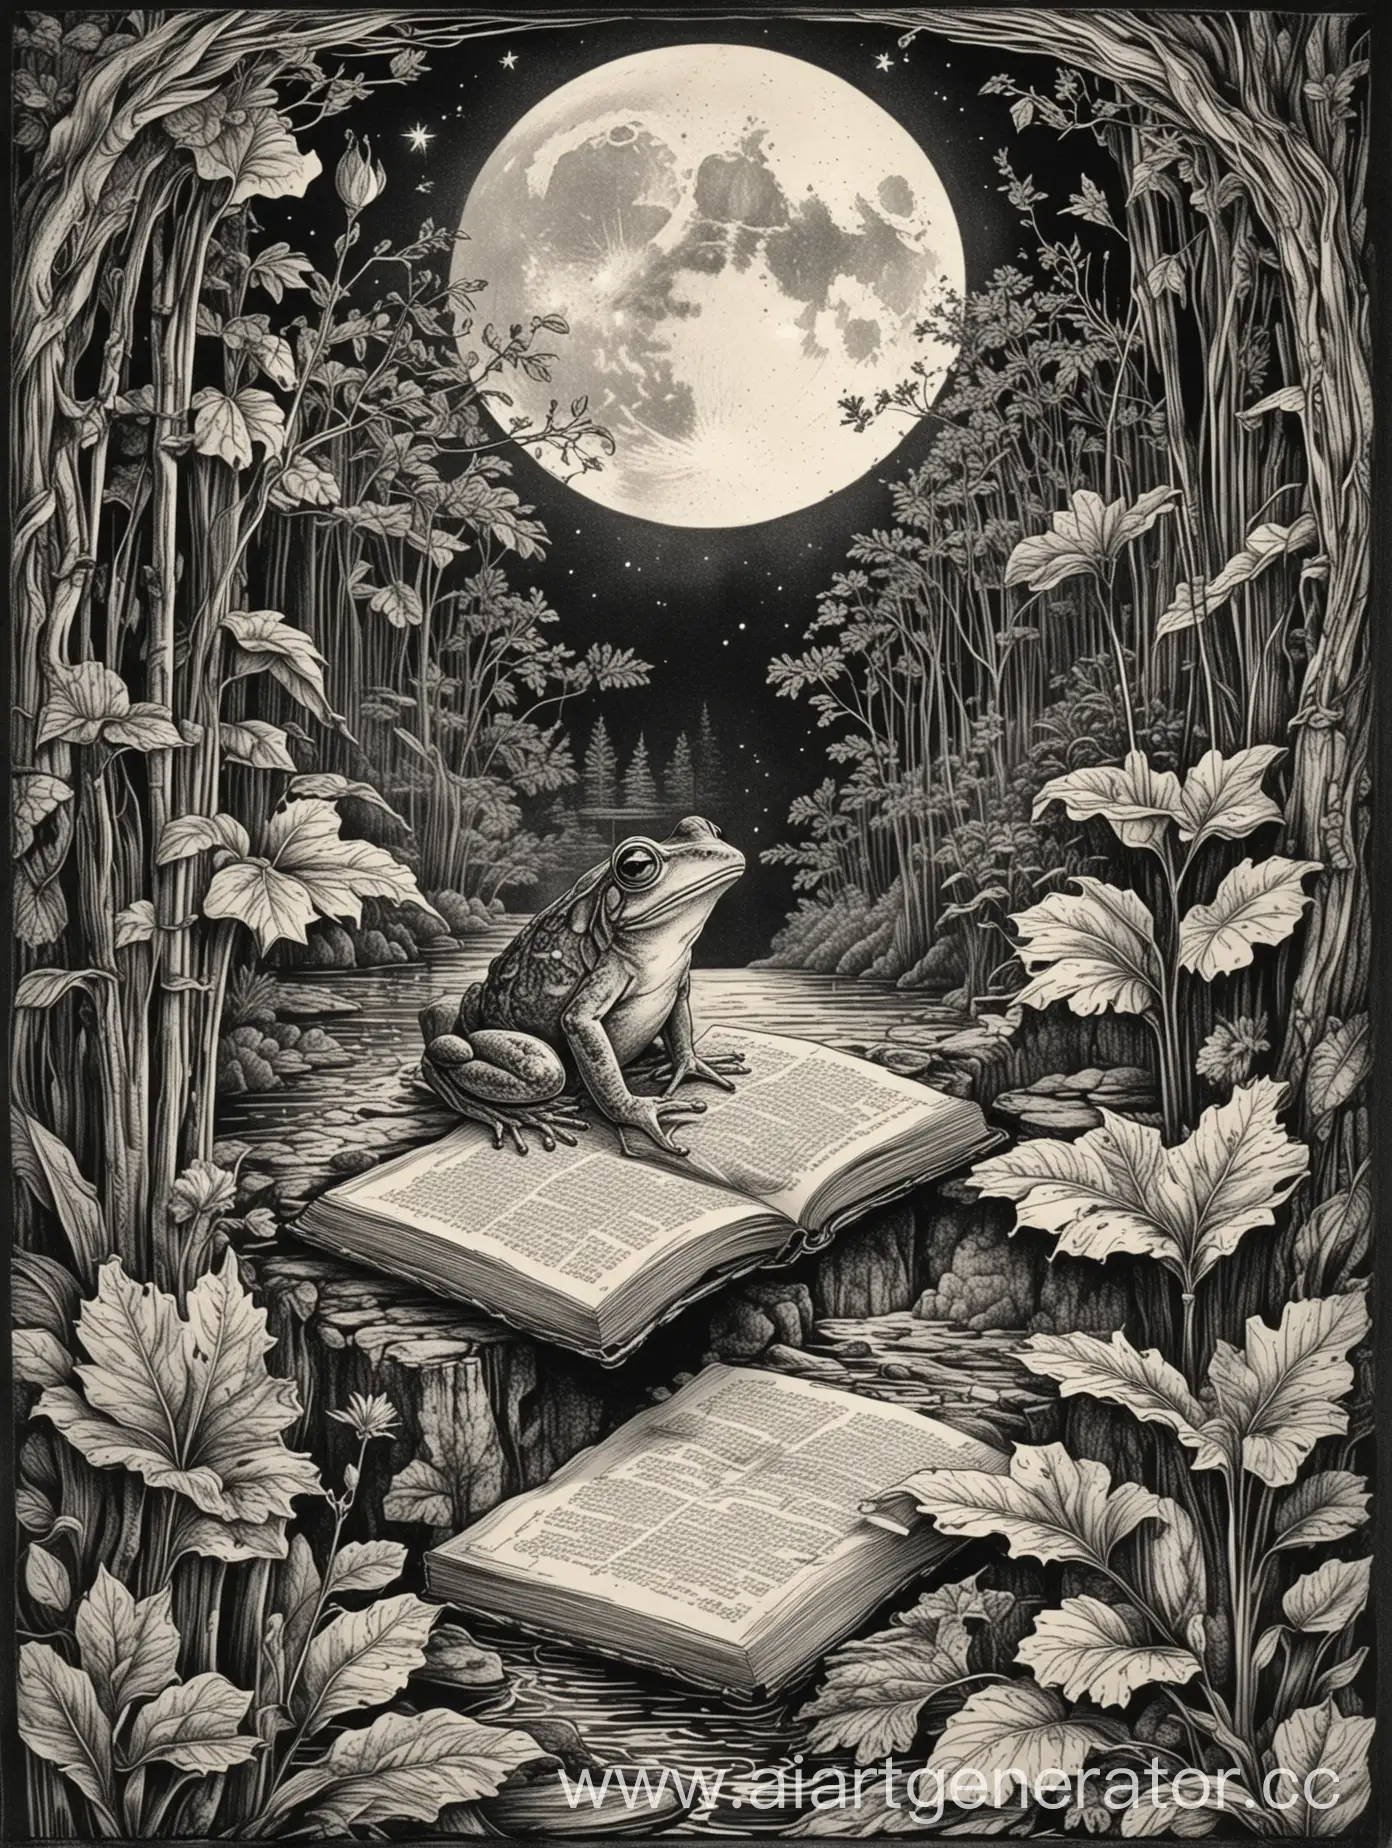 Frog-Reading-Book-in-Moonlit-Evening-by-Waterfall